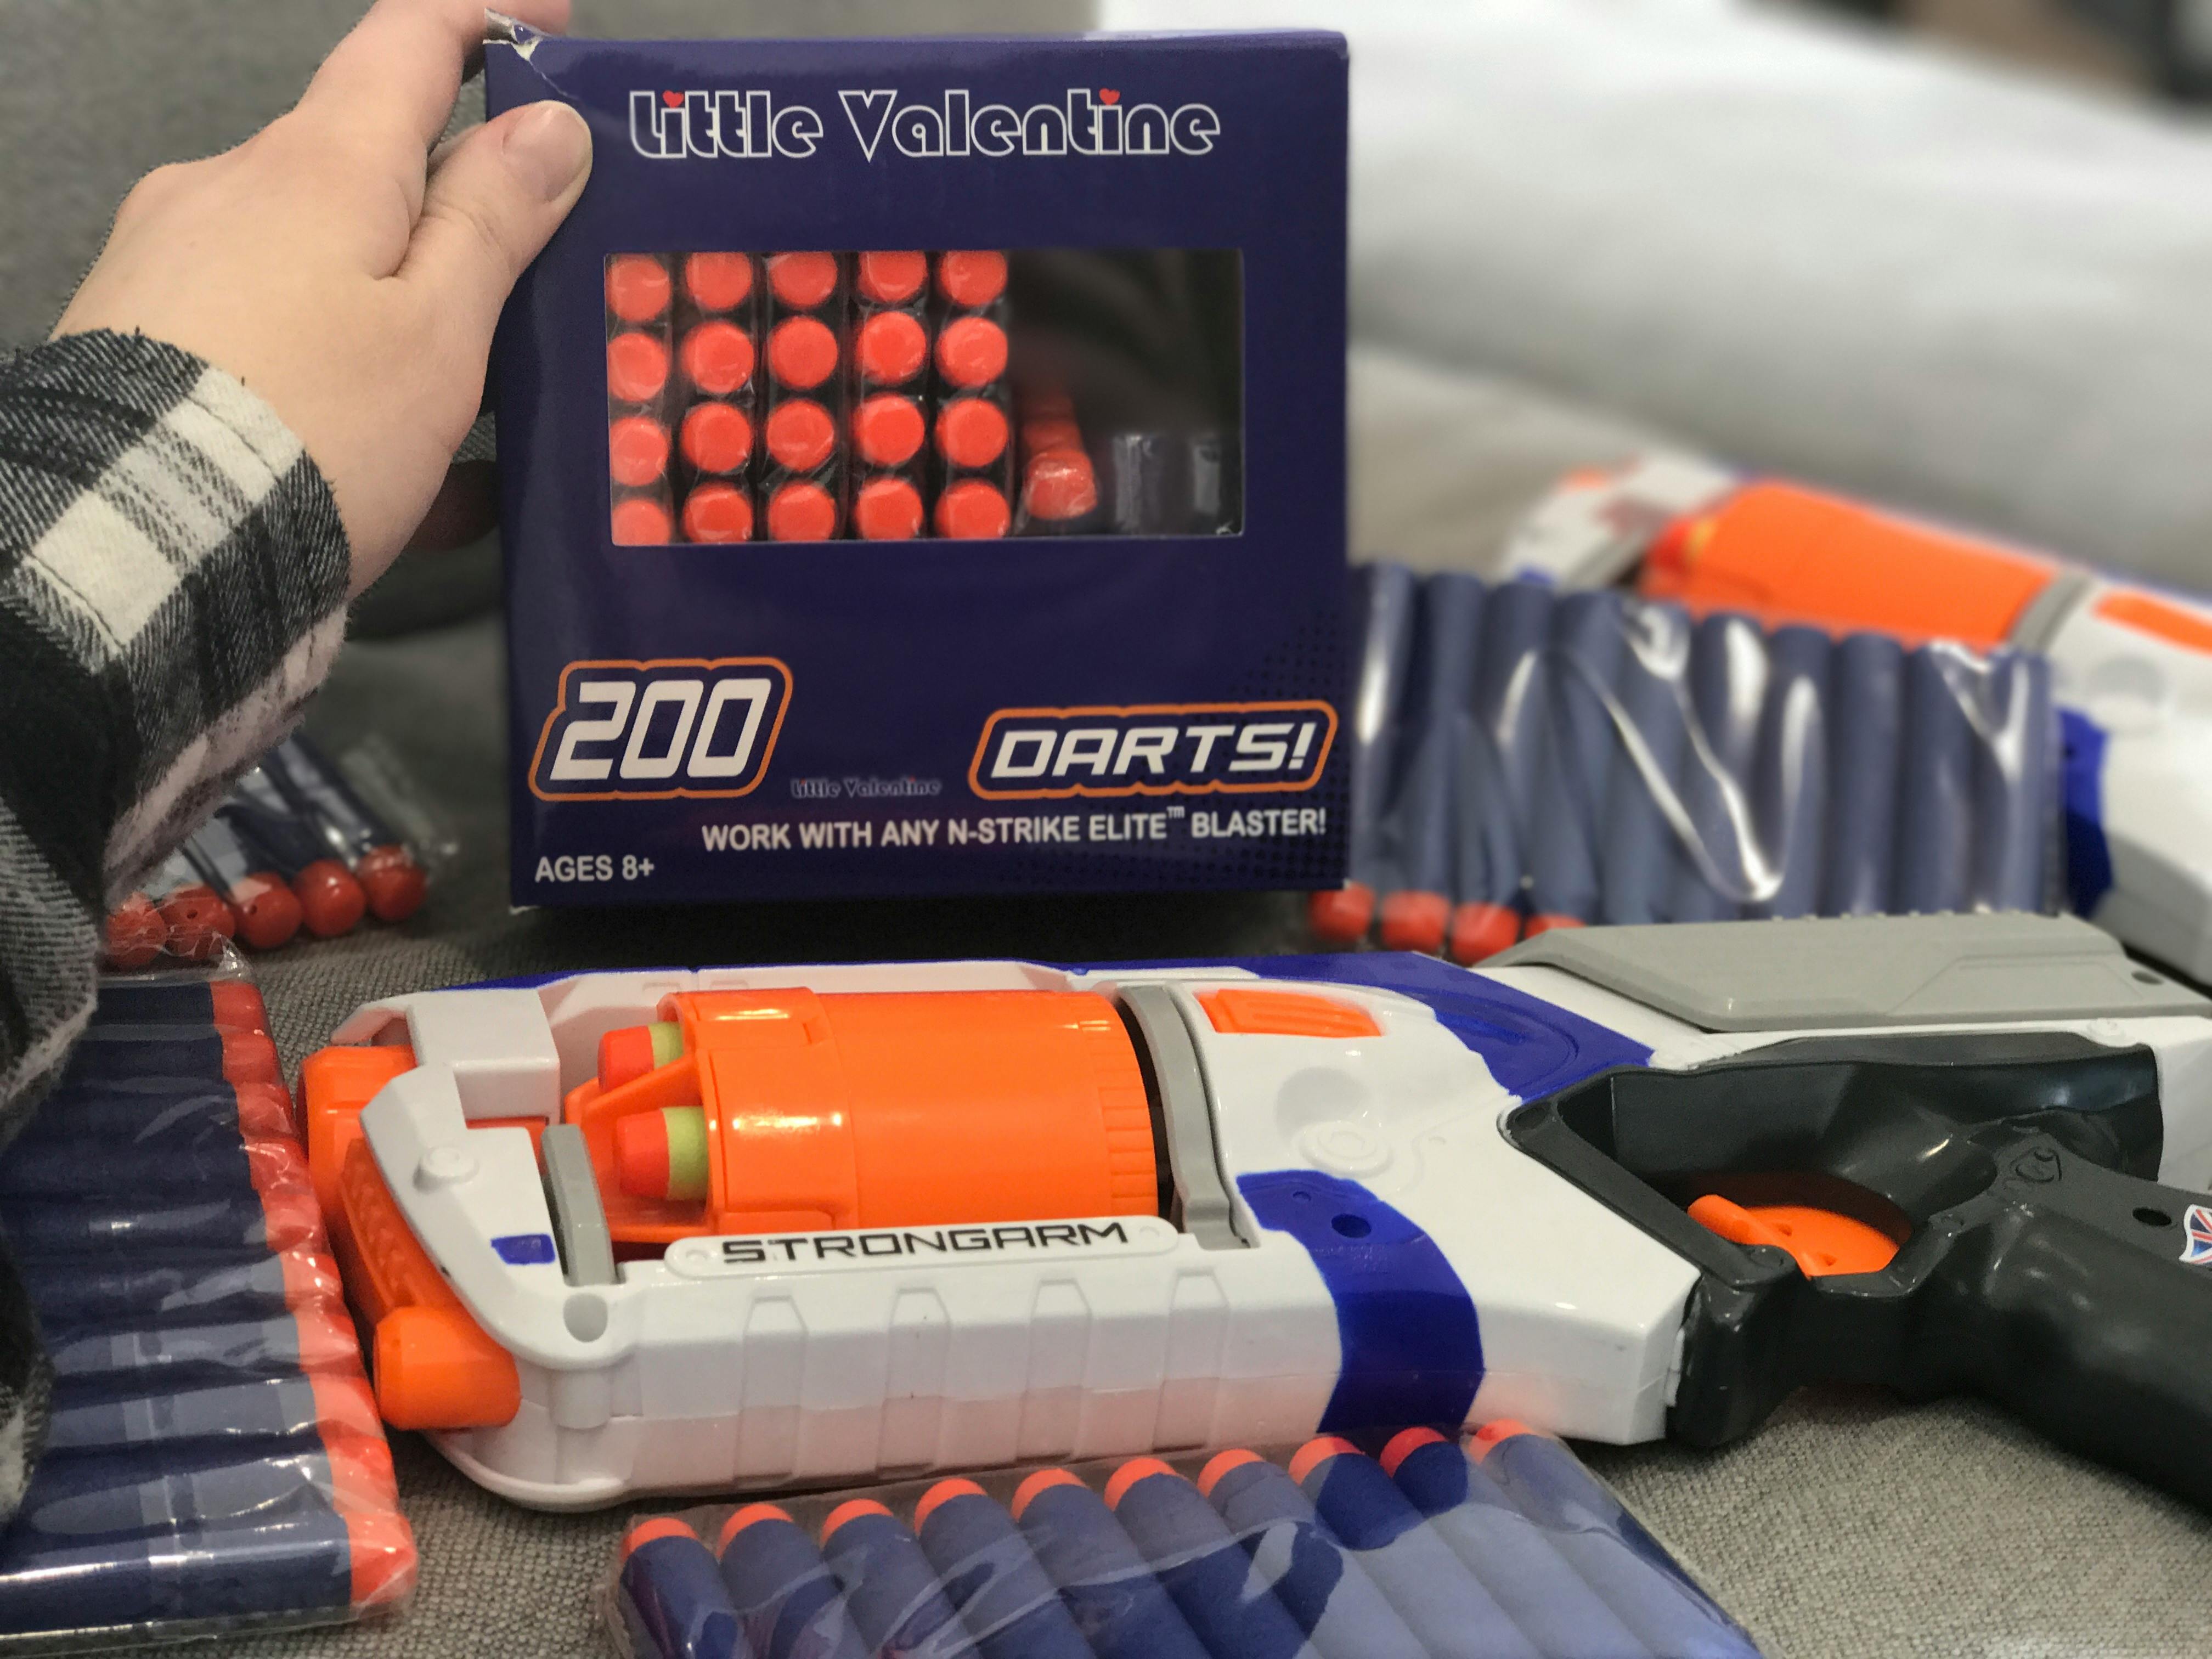 A person holding a package of generic Nerf guns bullets.